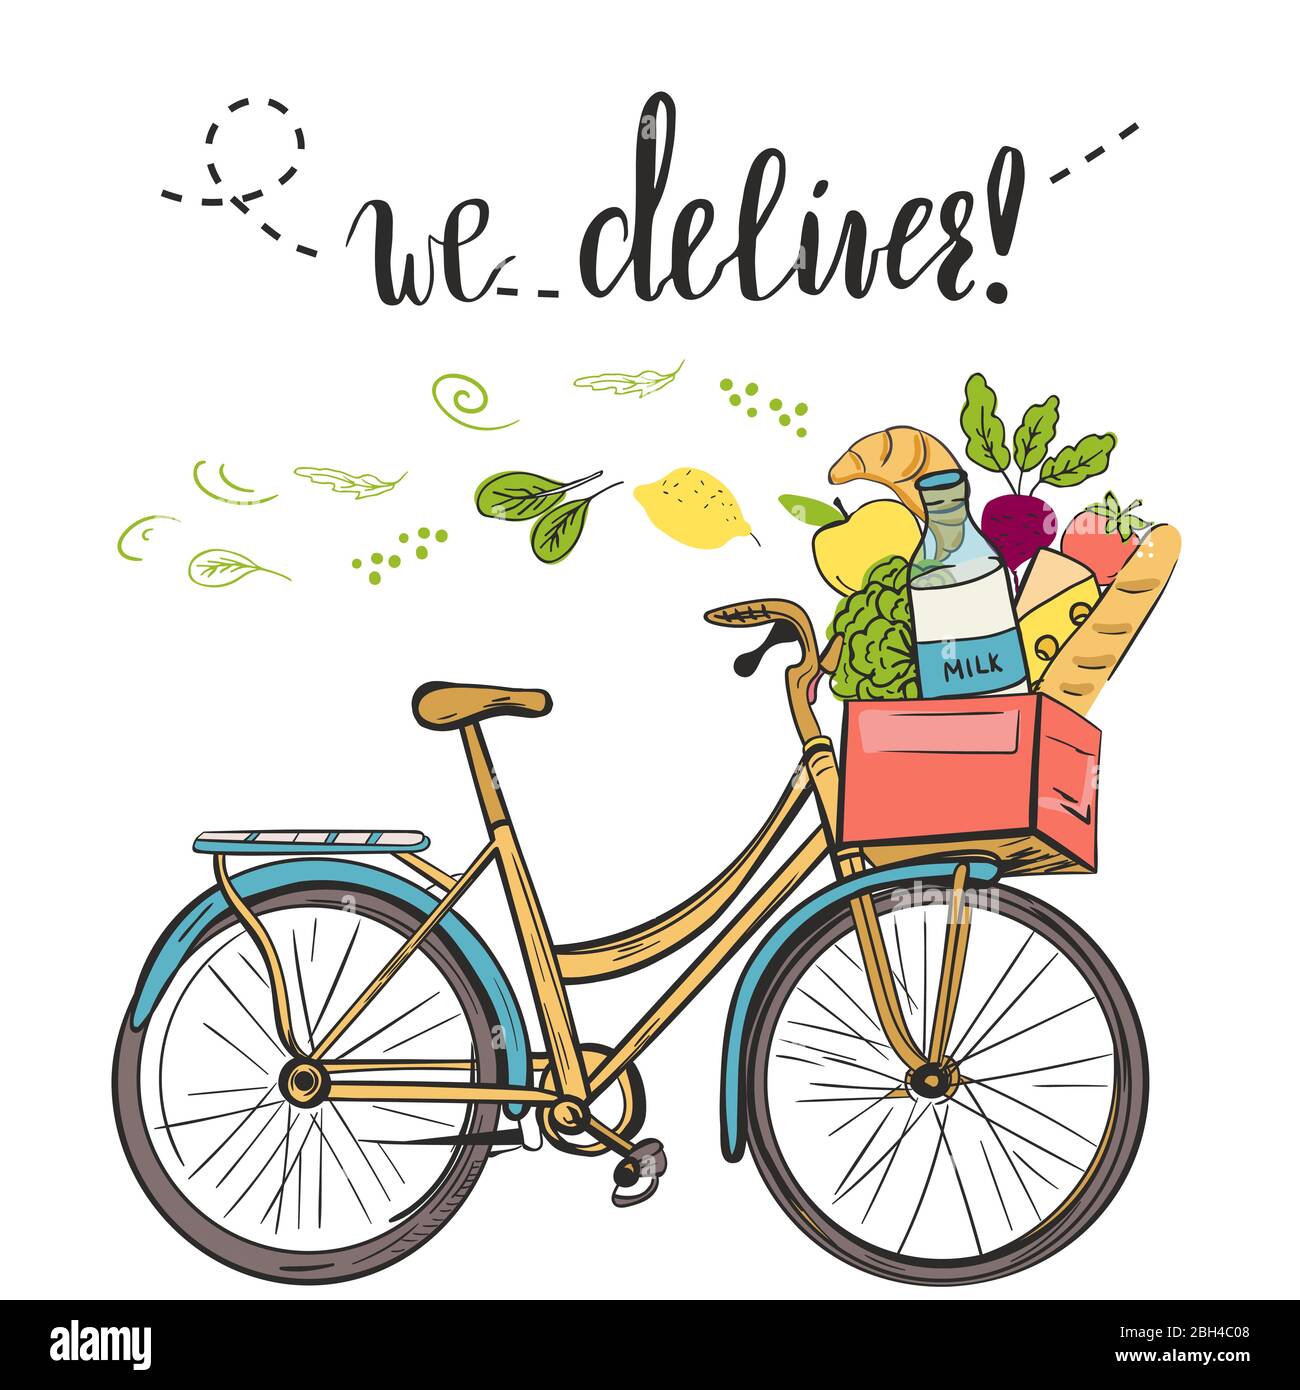 Food groccery delivery concept. Stock Vector